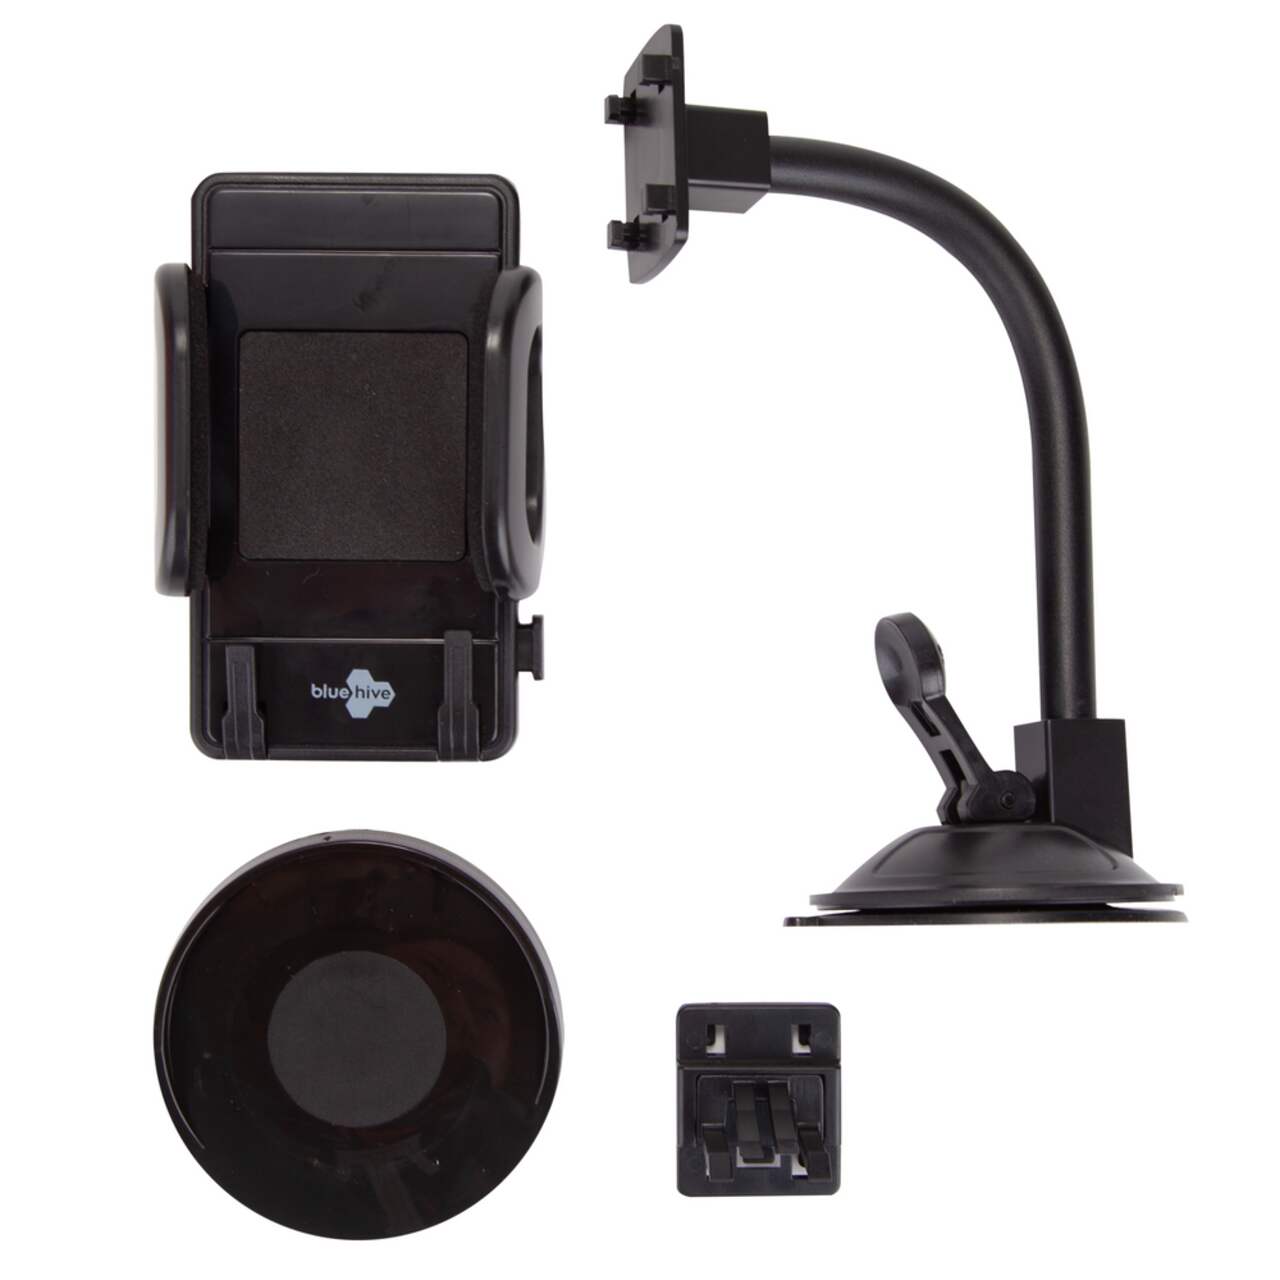 Bluehive 3-in-1 Universal Phone Mount, Secure Fit for Phones up to 4.3-in